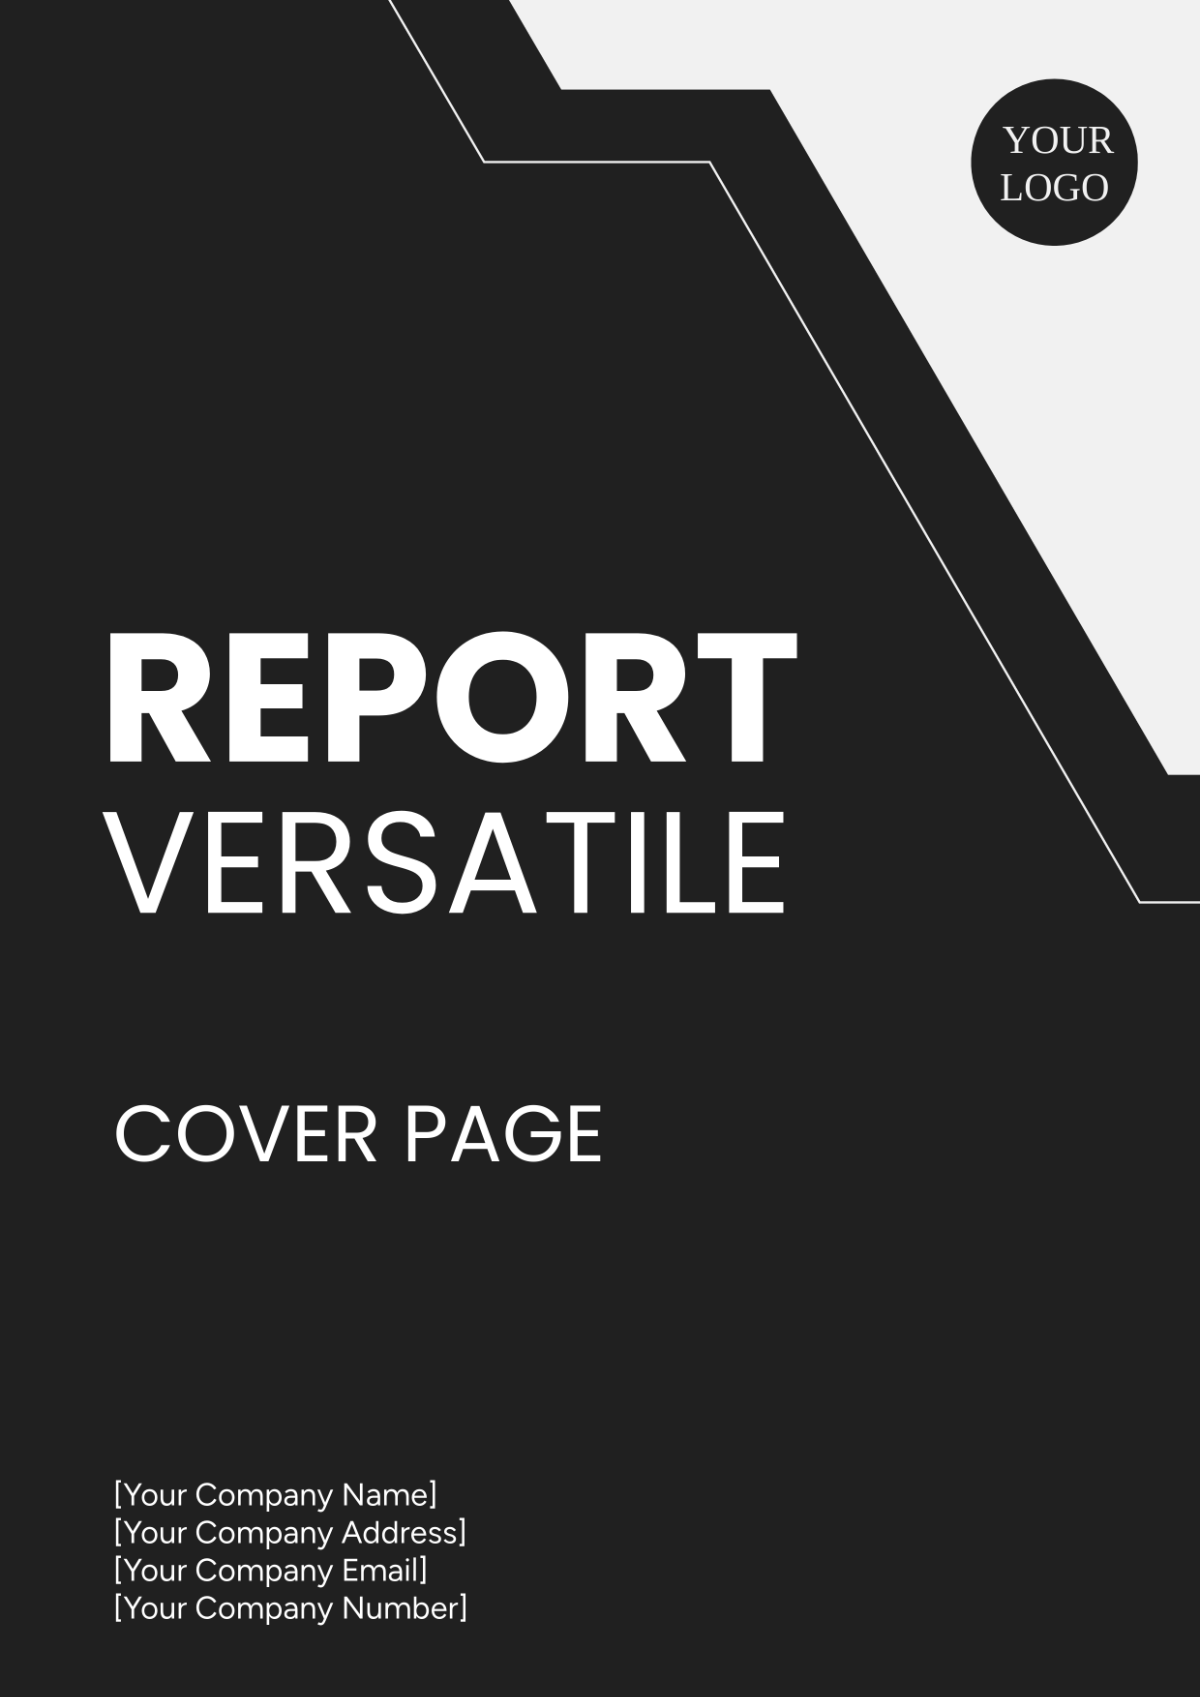 Report Versatile Cover Page